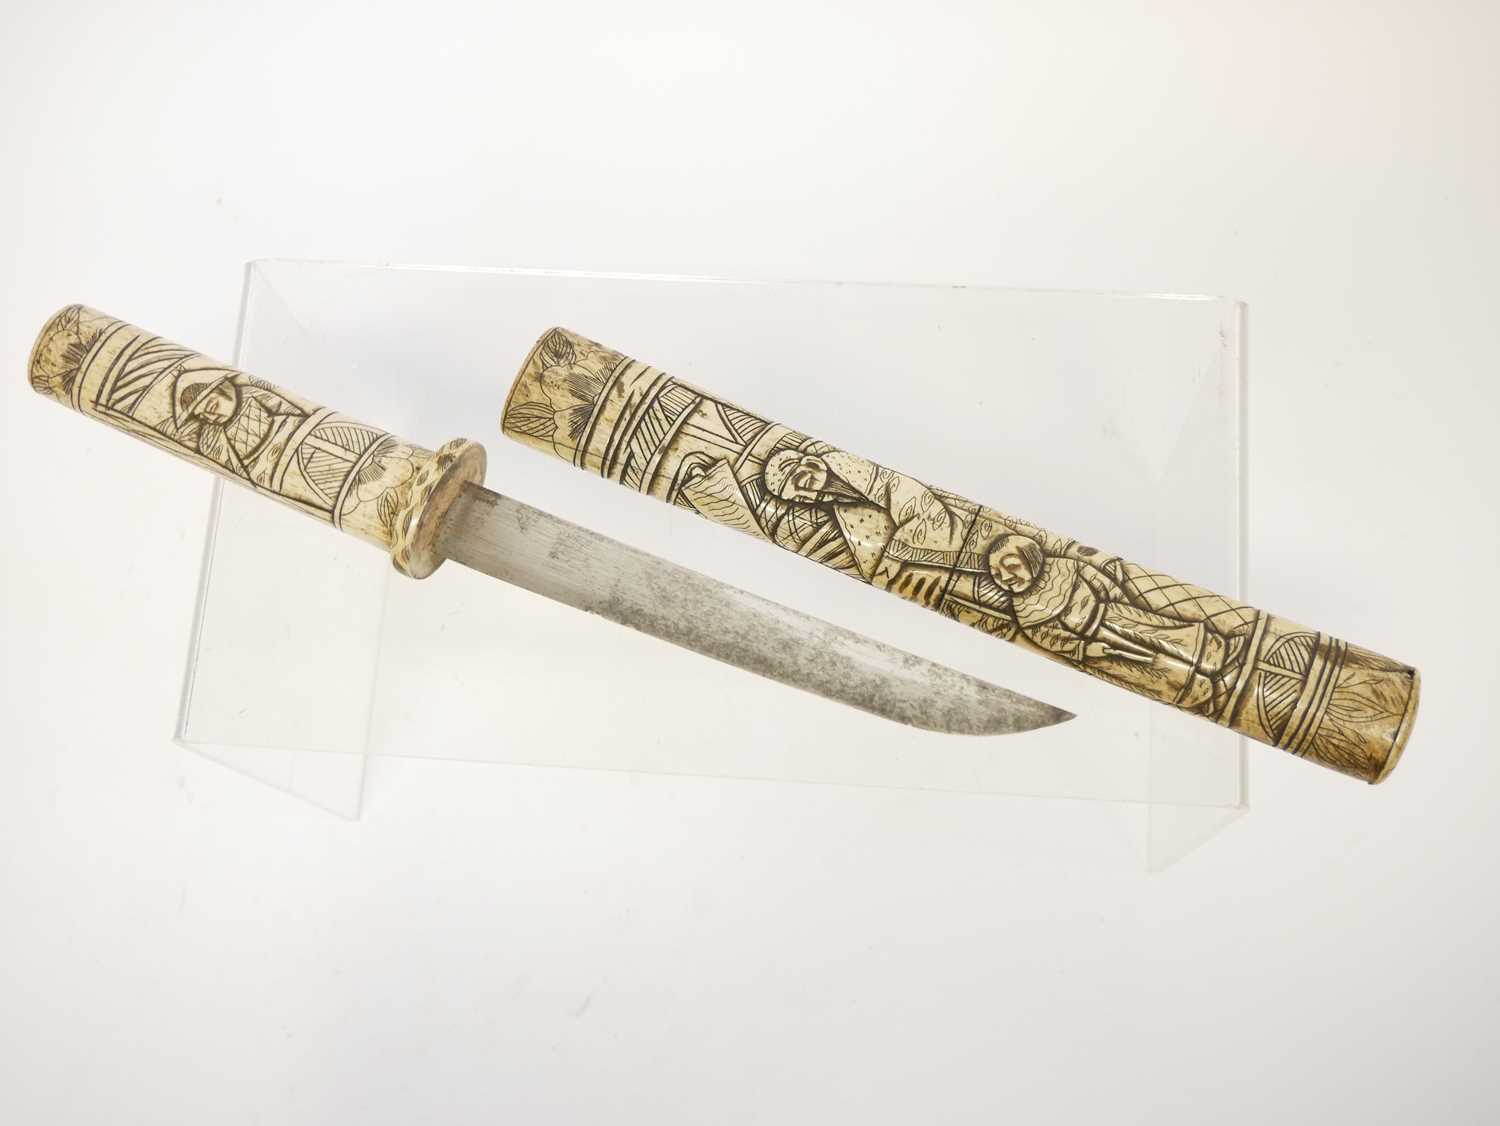 Japanese bone mounted tanto dagger, 7 inch cutting edge blade, the mounts carved and engraved with - Image 2 of 10